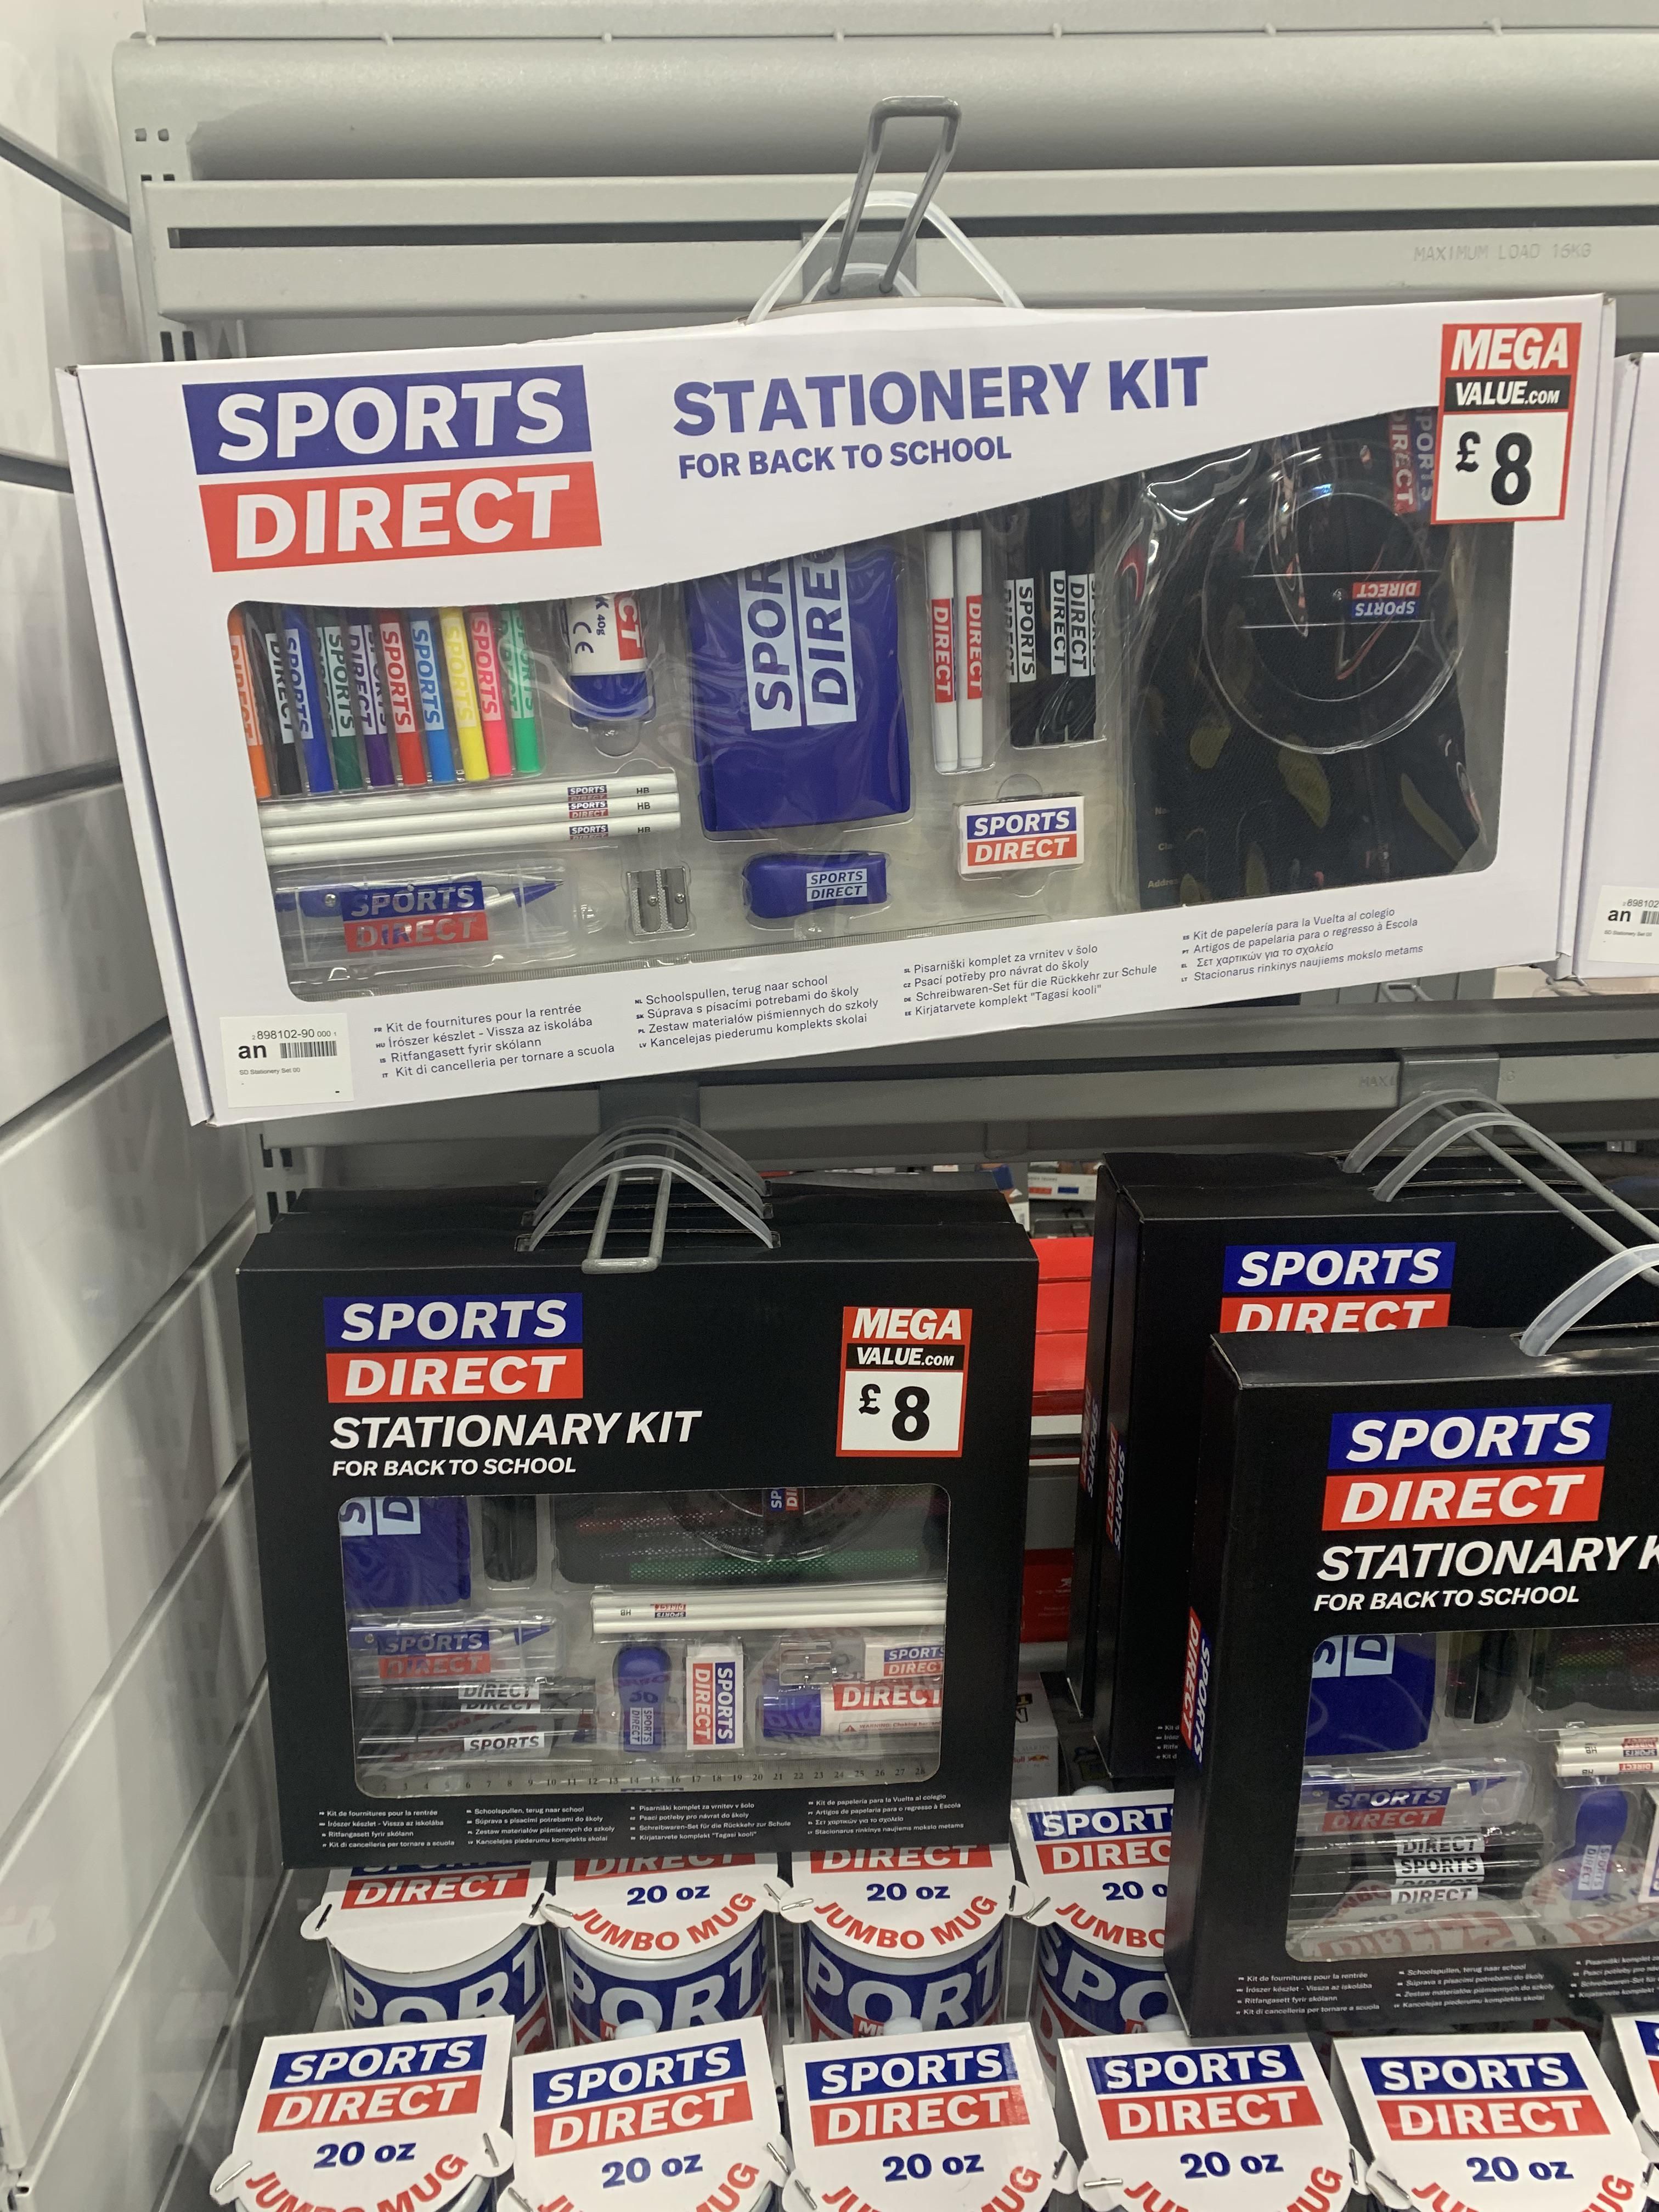 One of these stationery kits isn’t going anywhere.